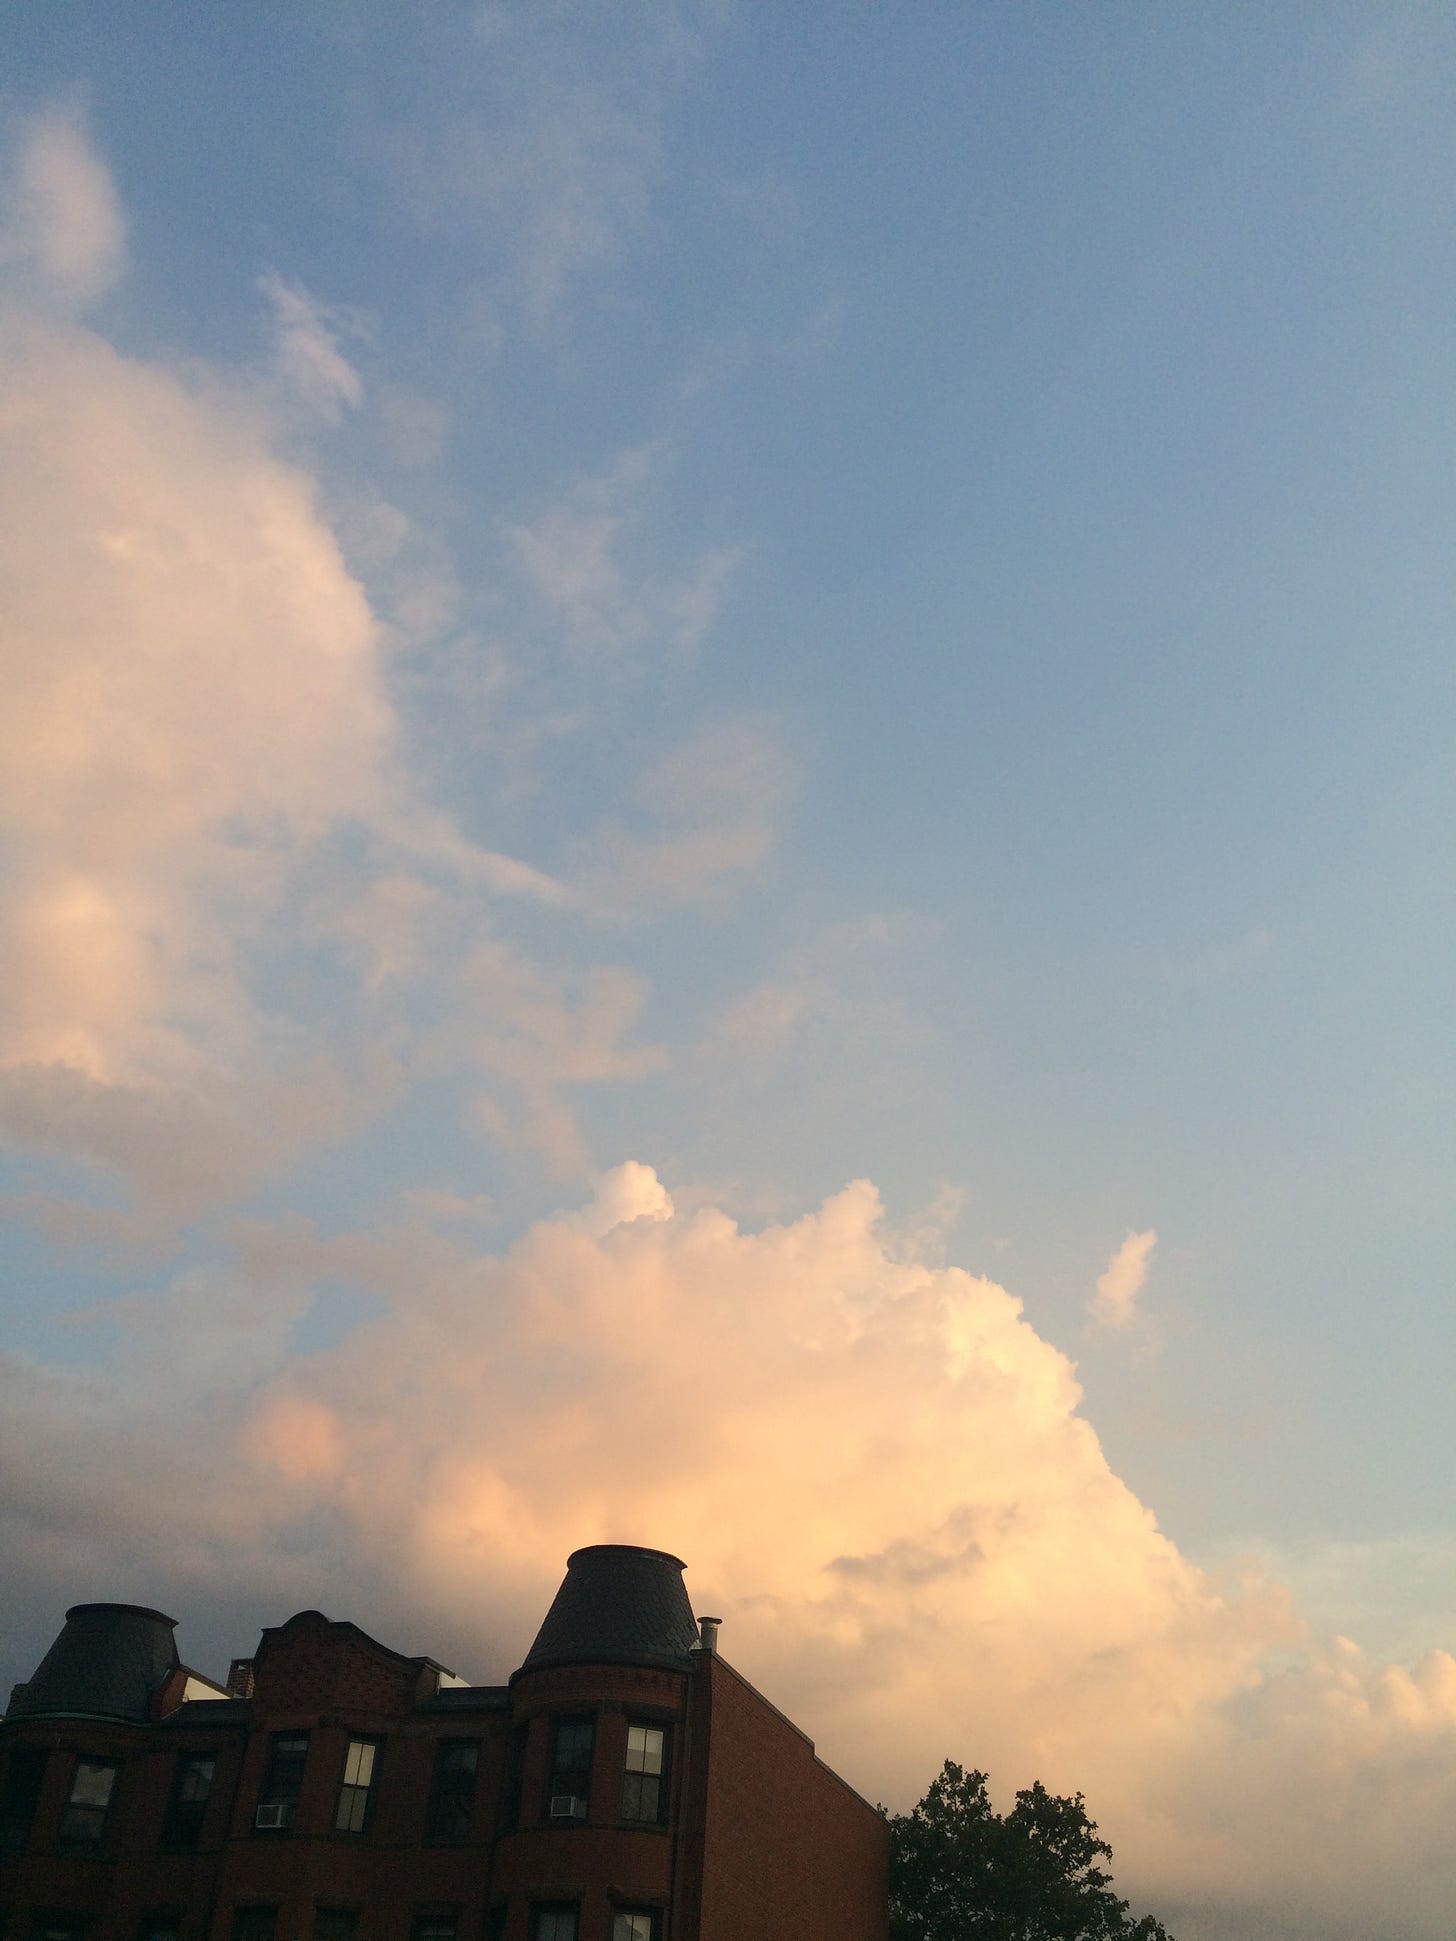 Some clouds in the sunset above buildings on Mass Ave